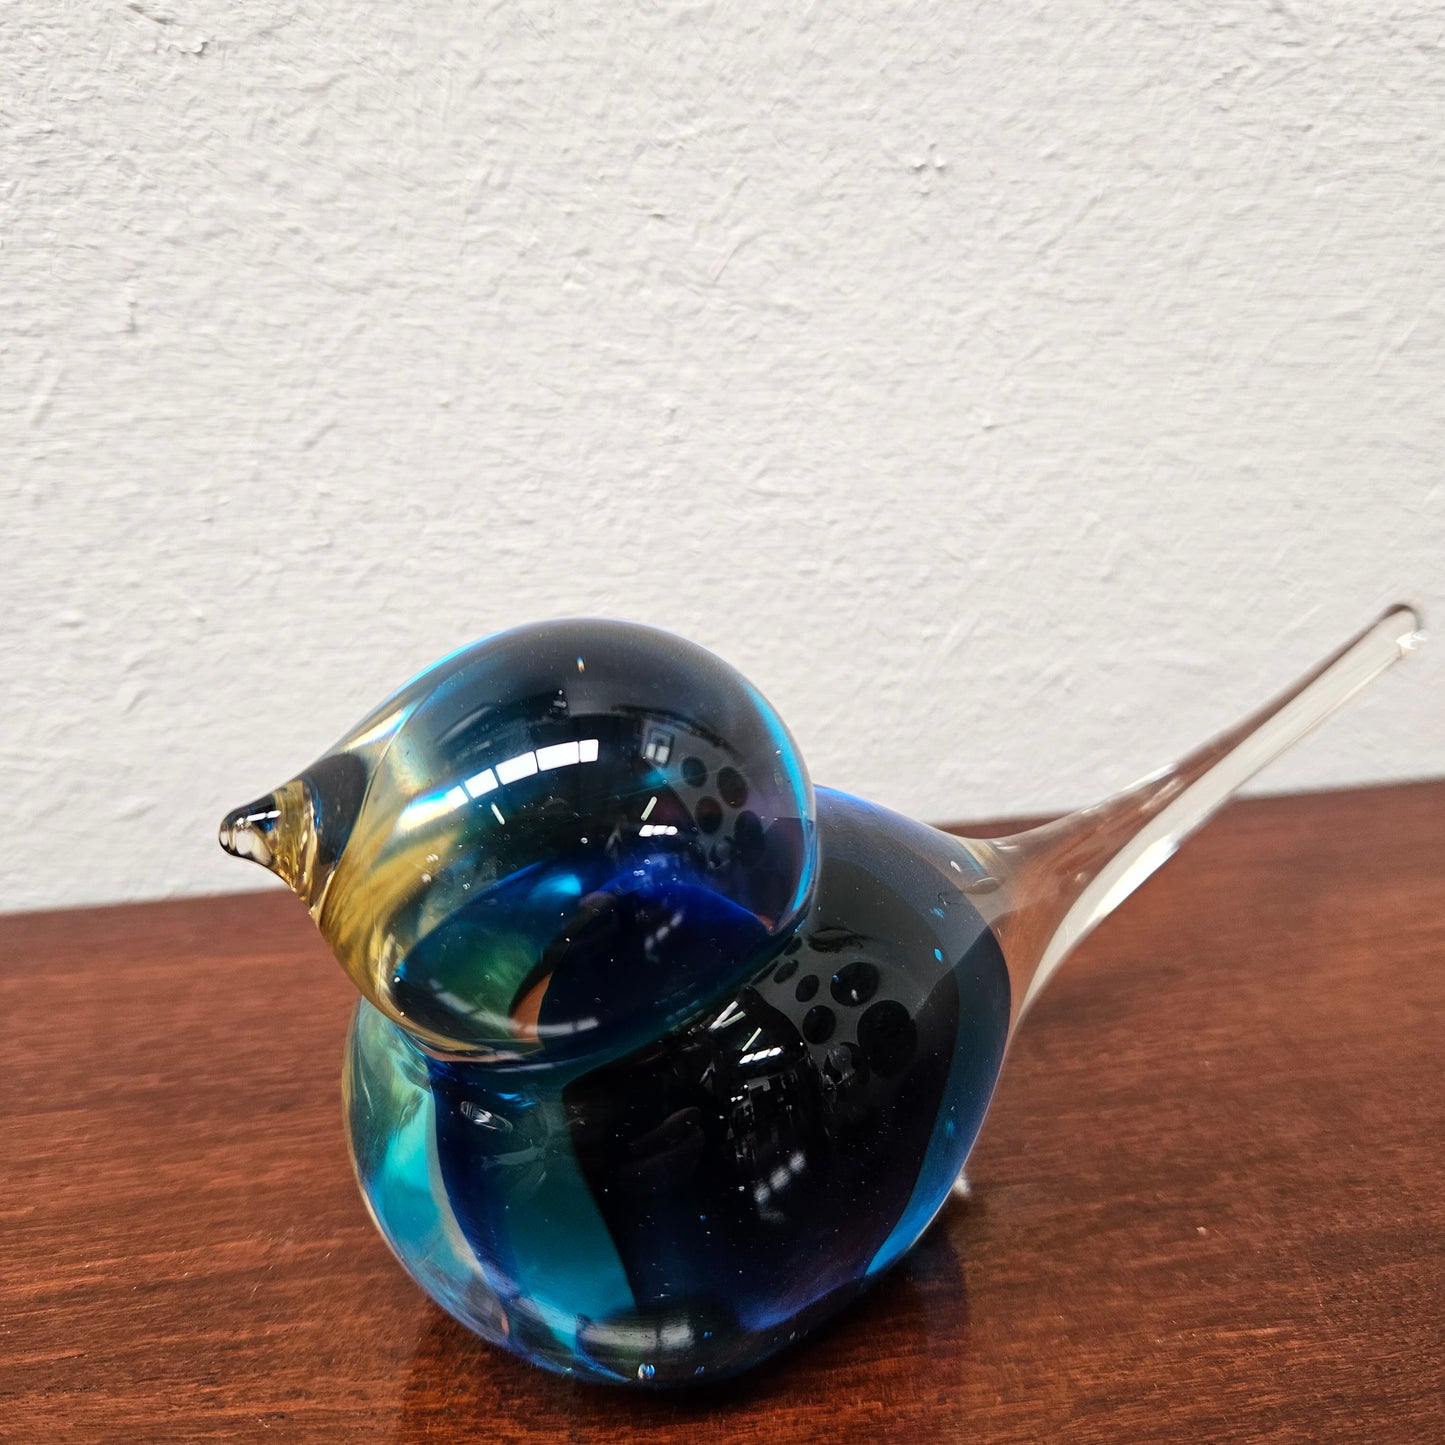 Dark blue, light blue and clear glass art glass bird figure. In good condition. Please see photos as they form part of the description.